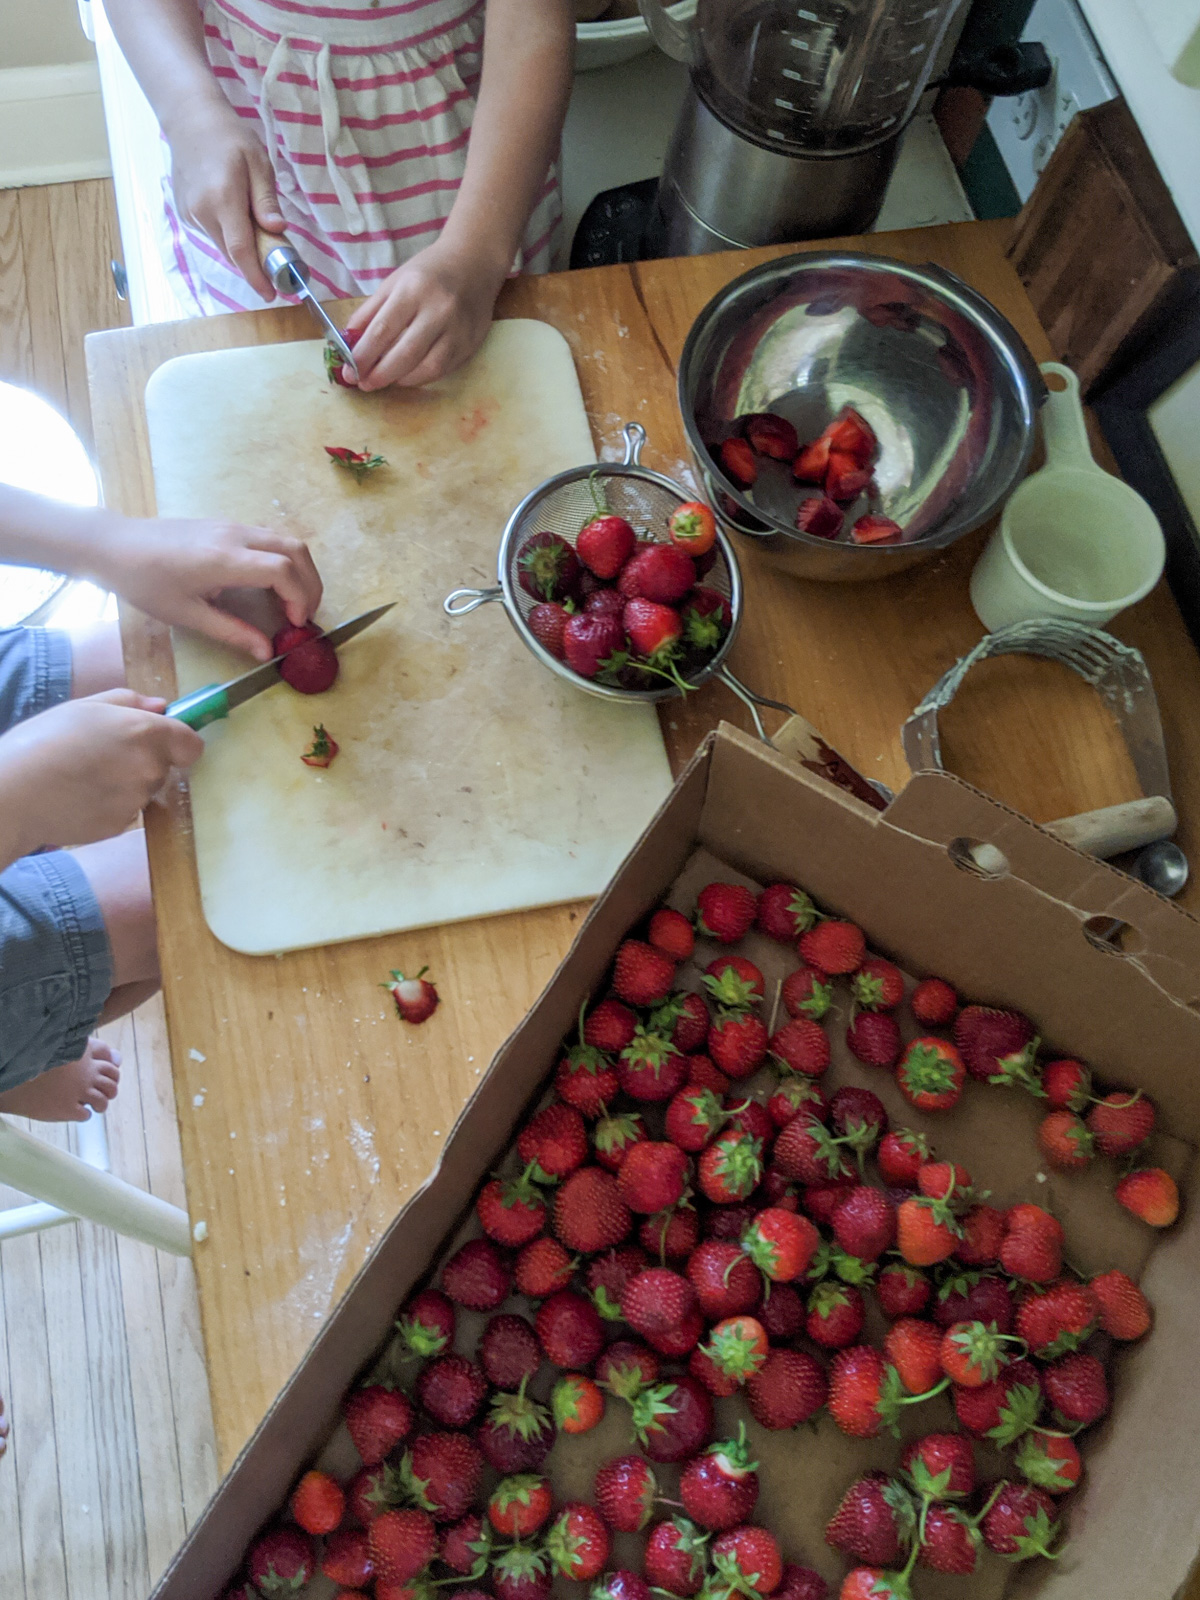 Kids slicing pick your own strawberries for shortcake.